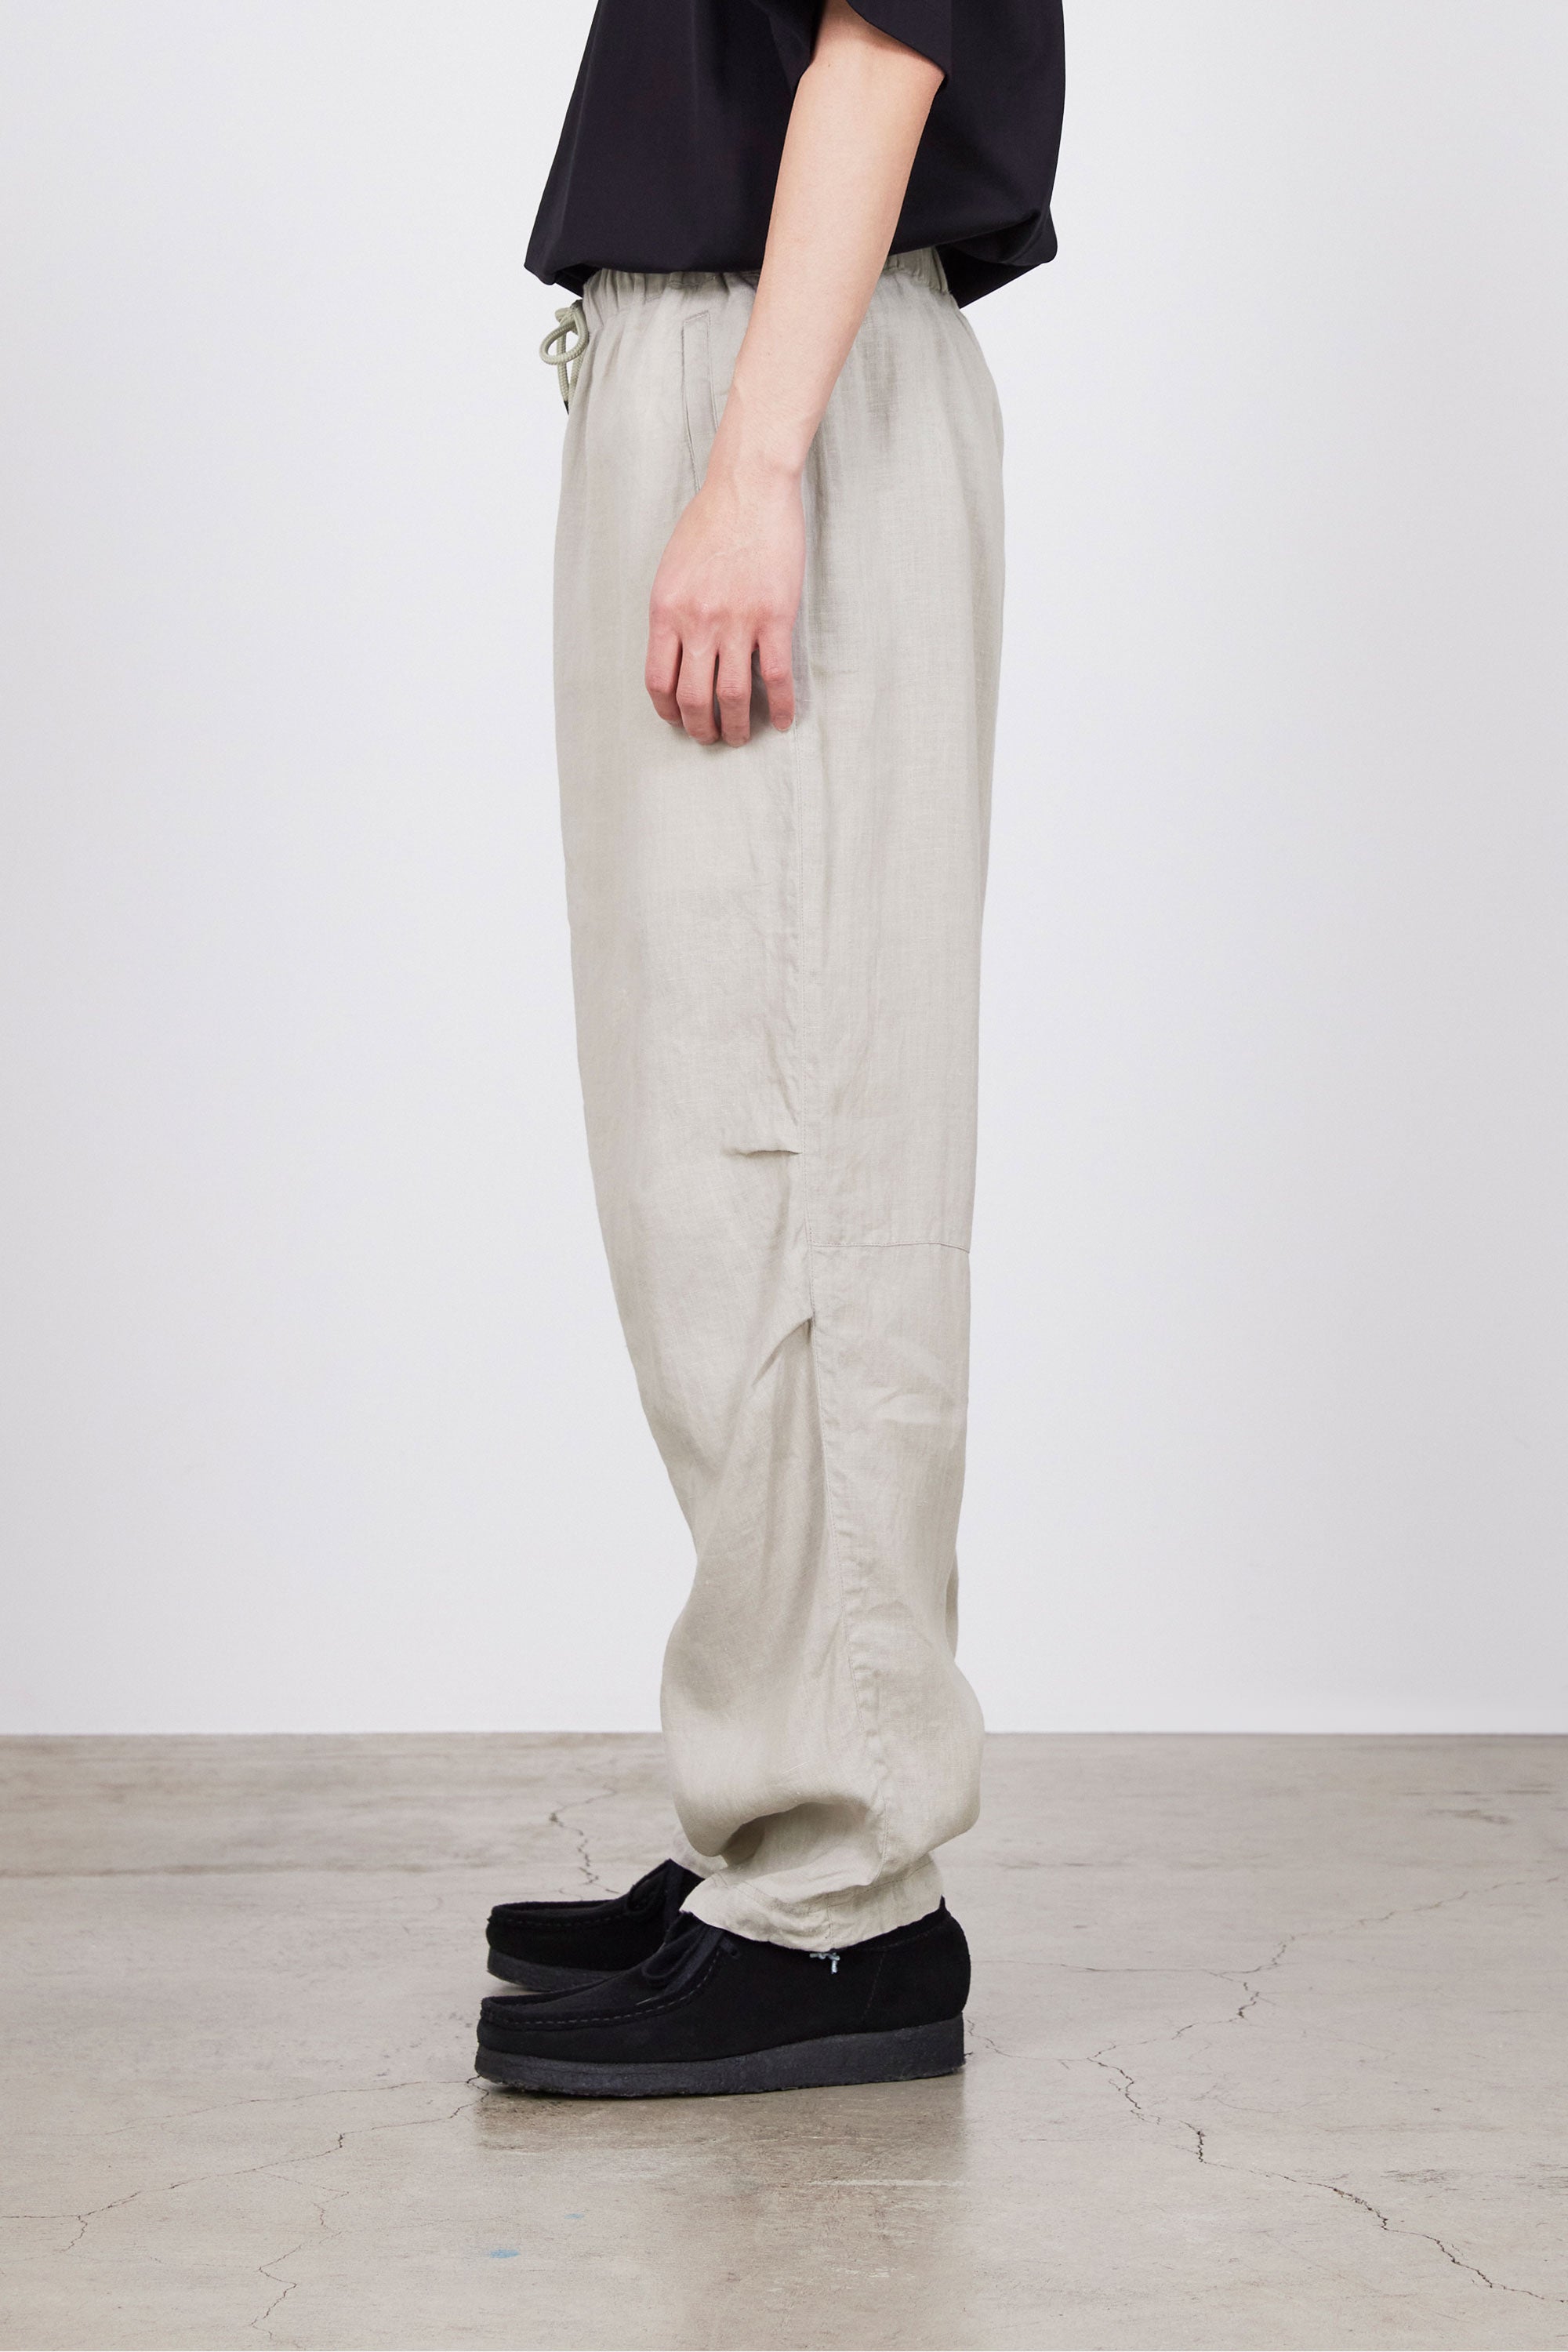 HEMP SHIRTING EASY ARMY TROUSERS, Taupe